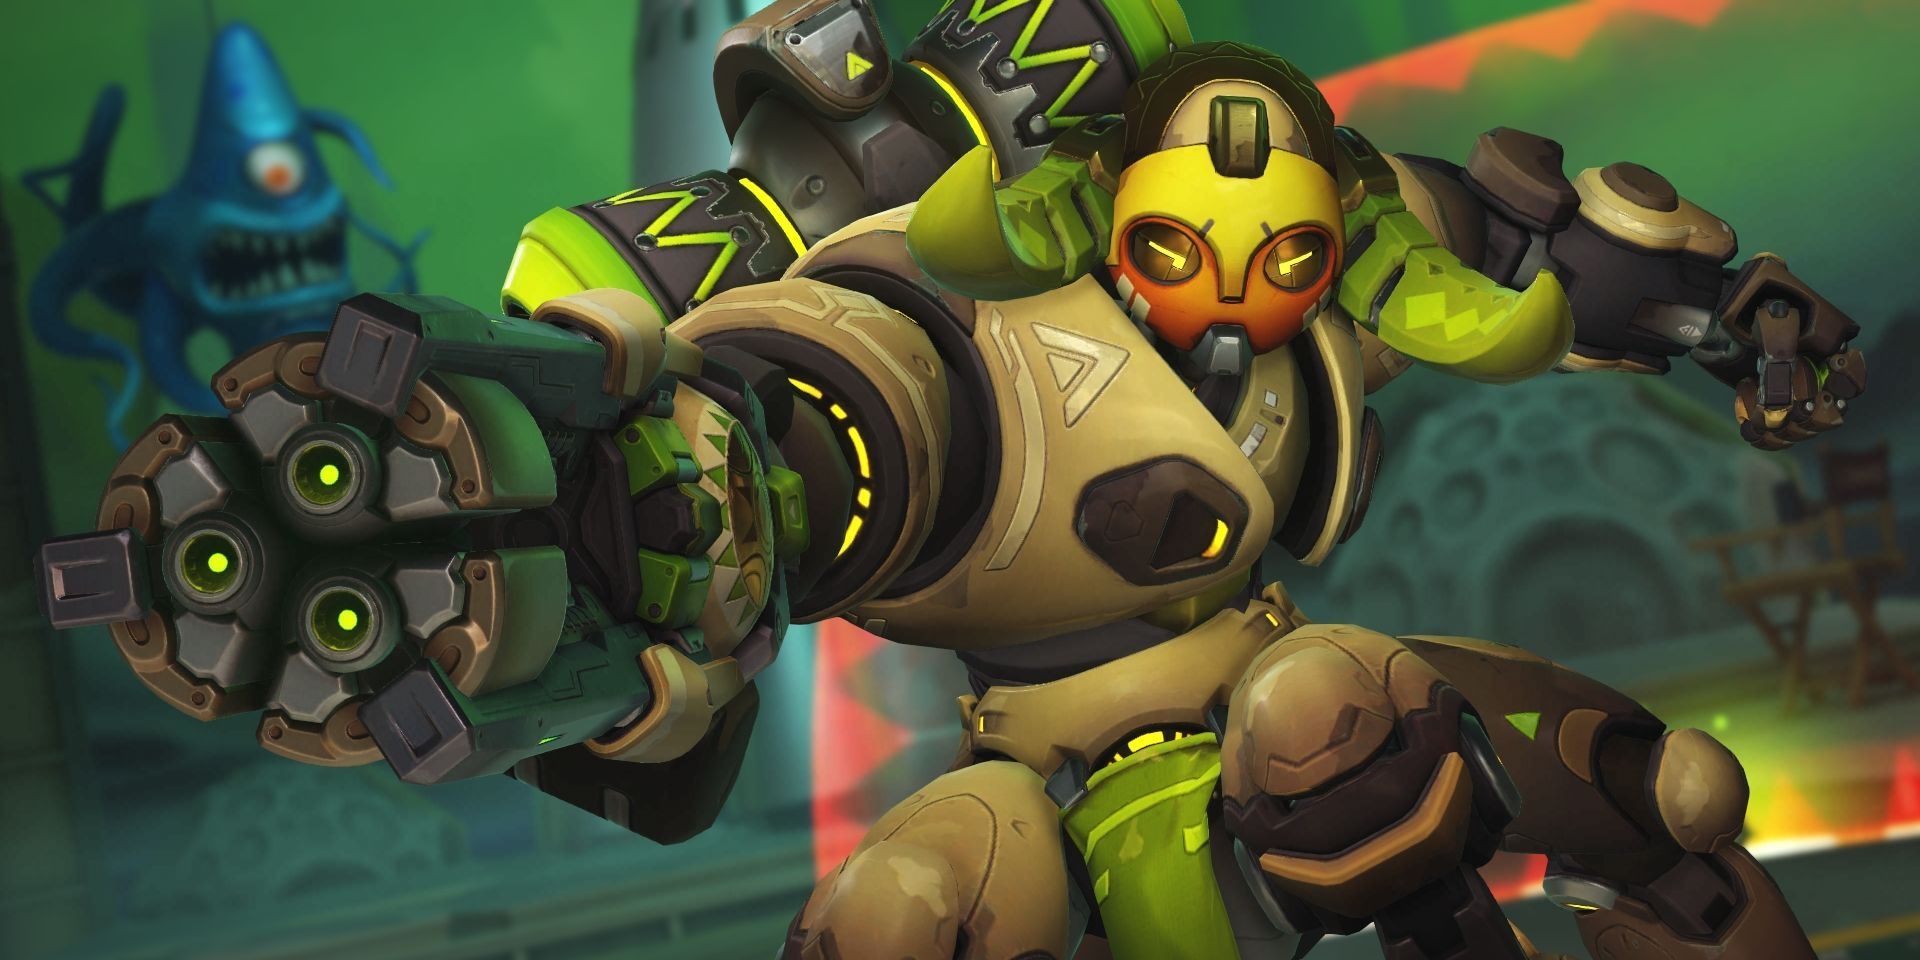 Orisa in a play of the game pose